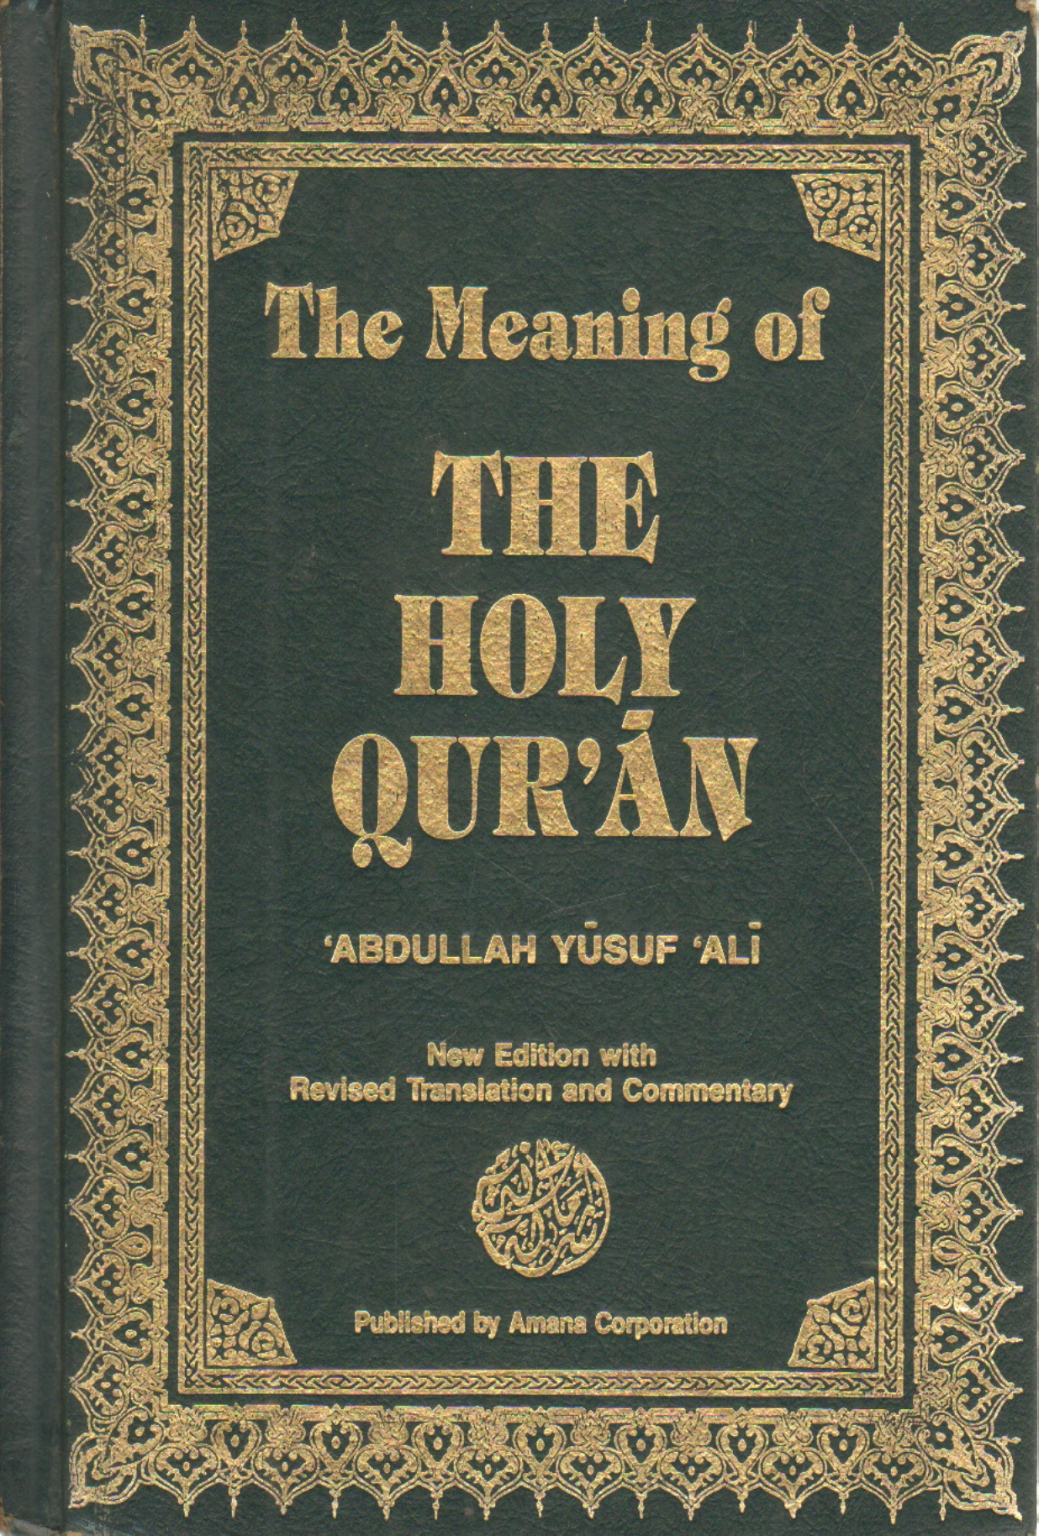 The Meaning of the holy Qur'an, 'Abdullah Yusuf 'Ali